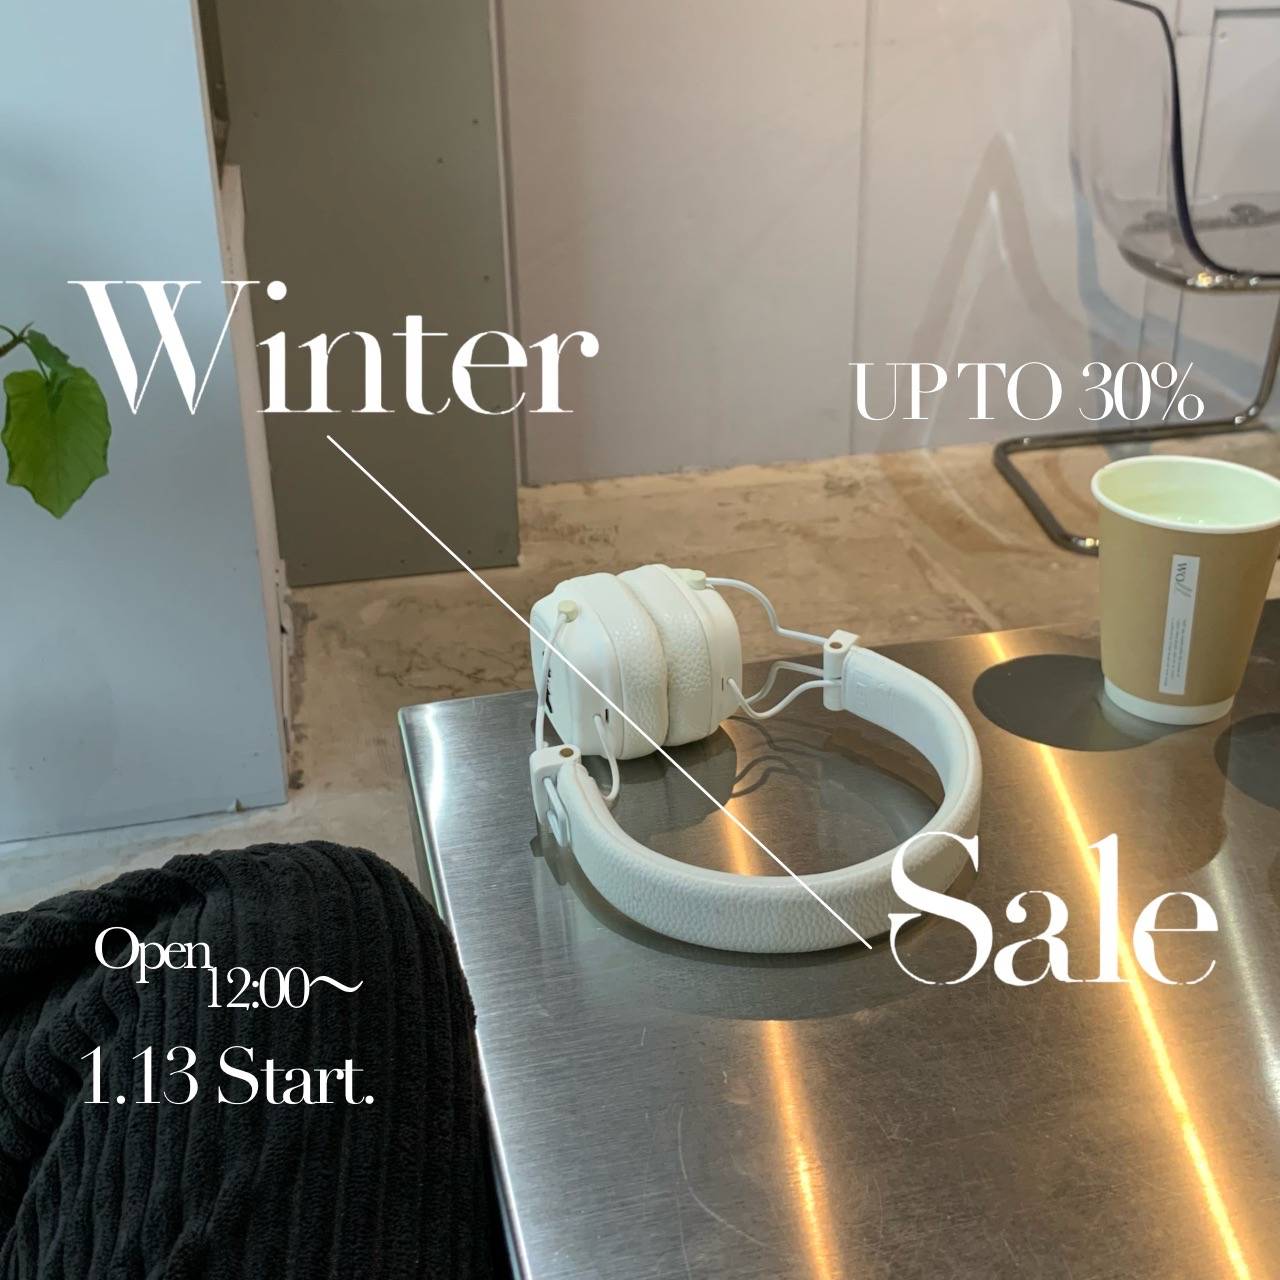 UP TO 30%!! Winter SALE😻